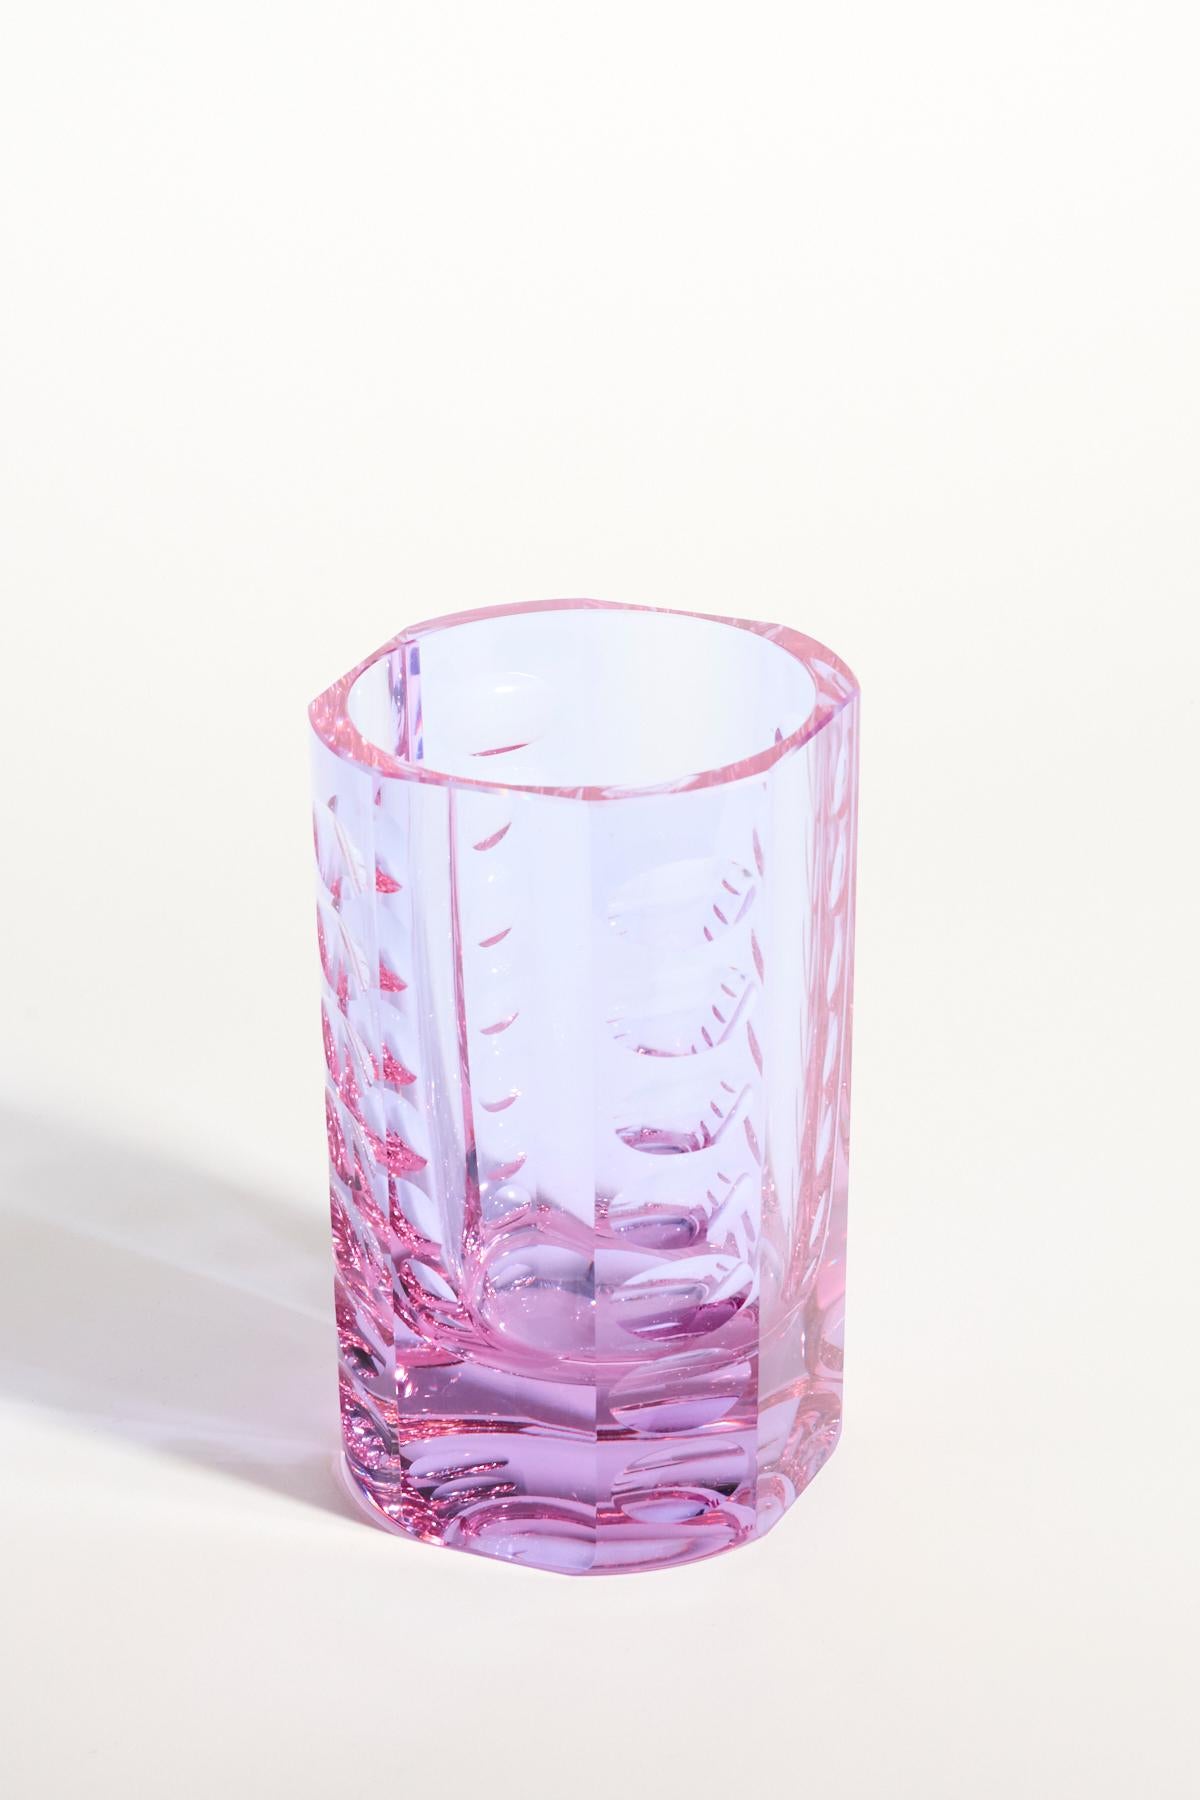 Moser Glass Vase In Excellent Condition For Sale In New York, NY